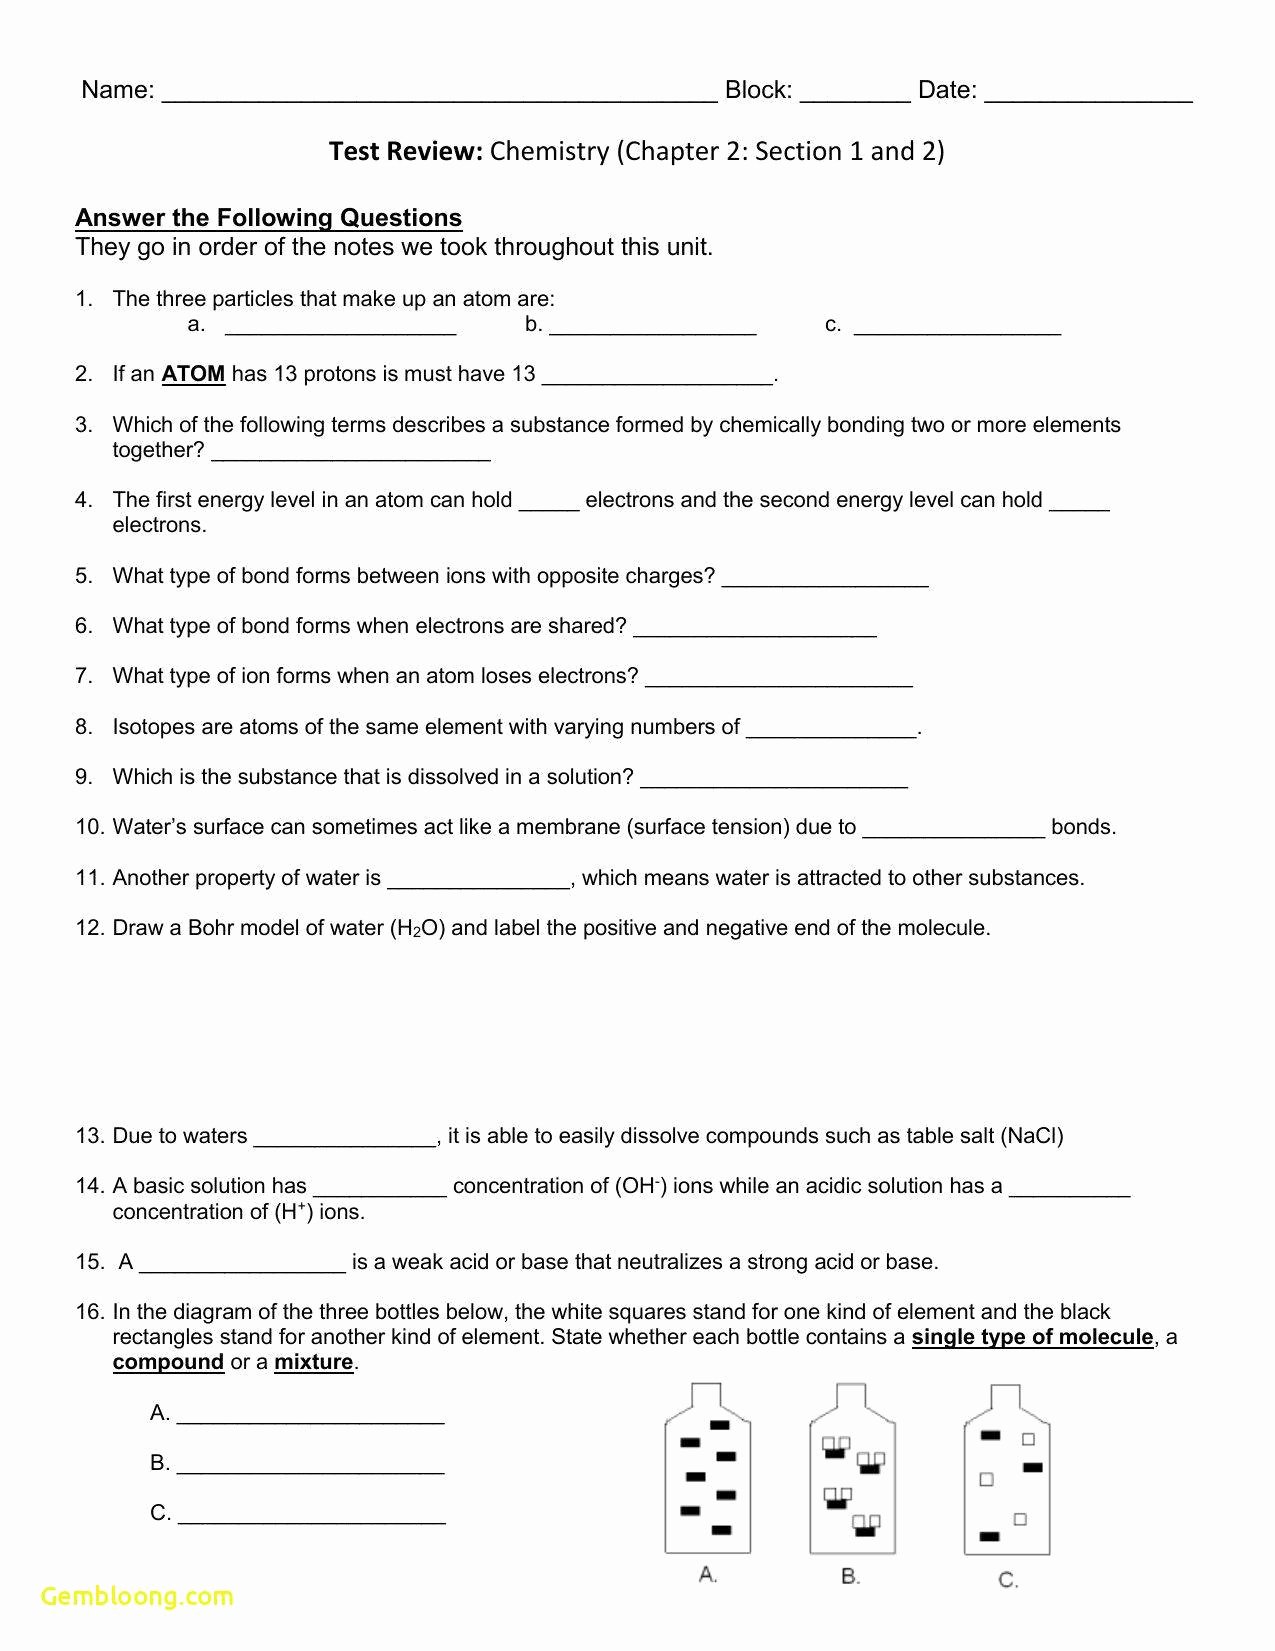 Calculating force Worksheet Answers Luxury Calculating force Worksheet Answers Cramerforcongress